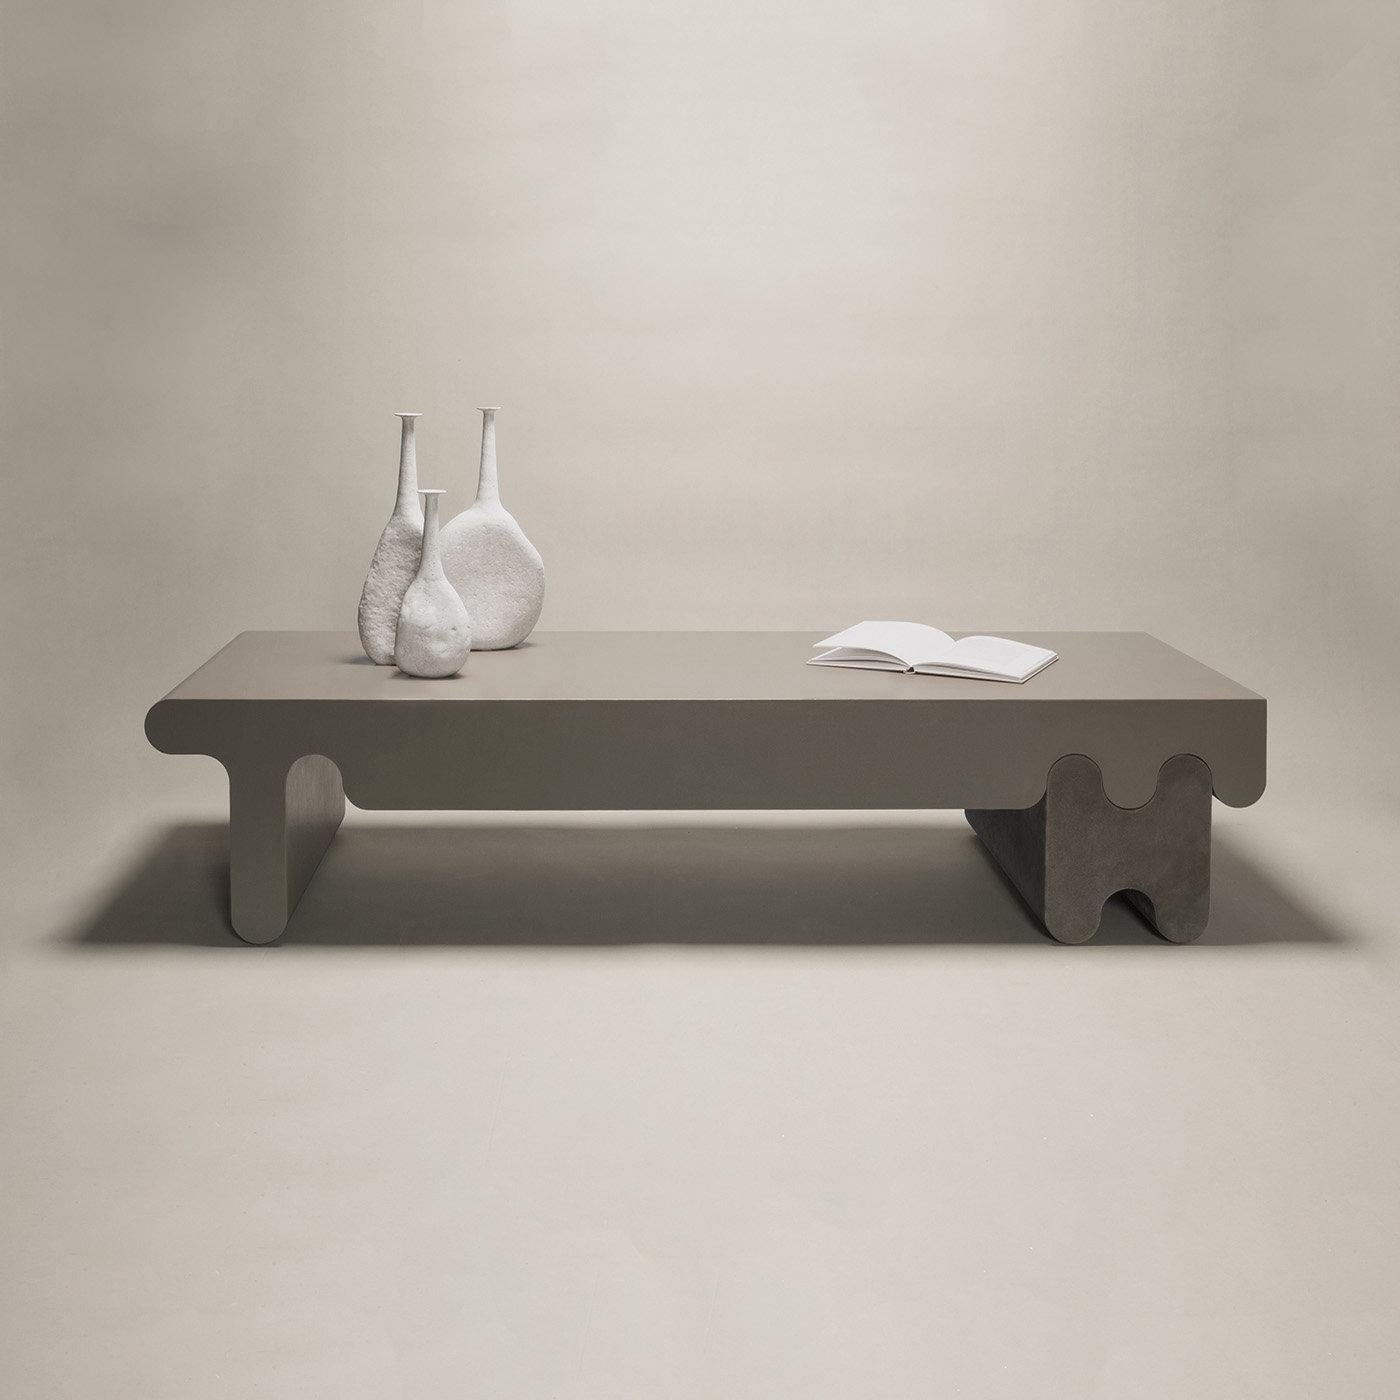 Contemporary leather coffee table - Ossicle by Francesco Balzano for Giobagnara.
The object presented in the image has following finish: F83 stone nappa leather (top) and A24 smoke suede leather (legs).

Part of an exquisite series of benches,